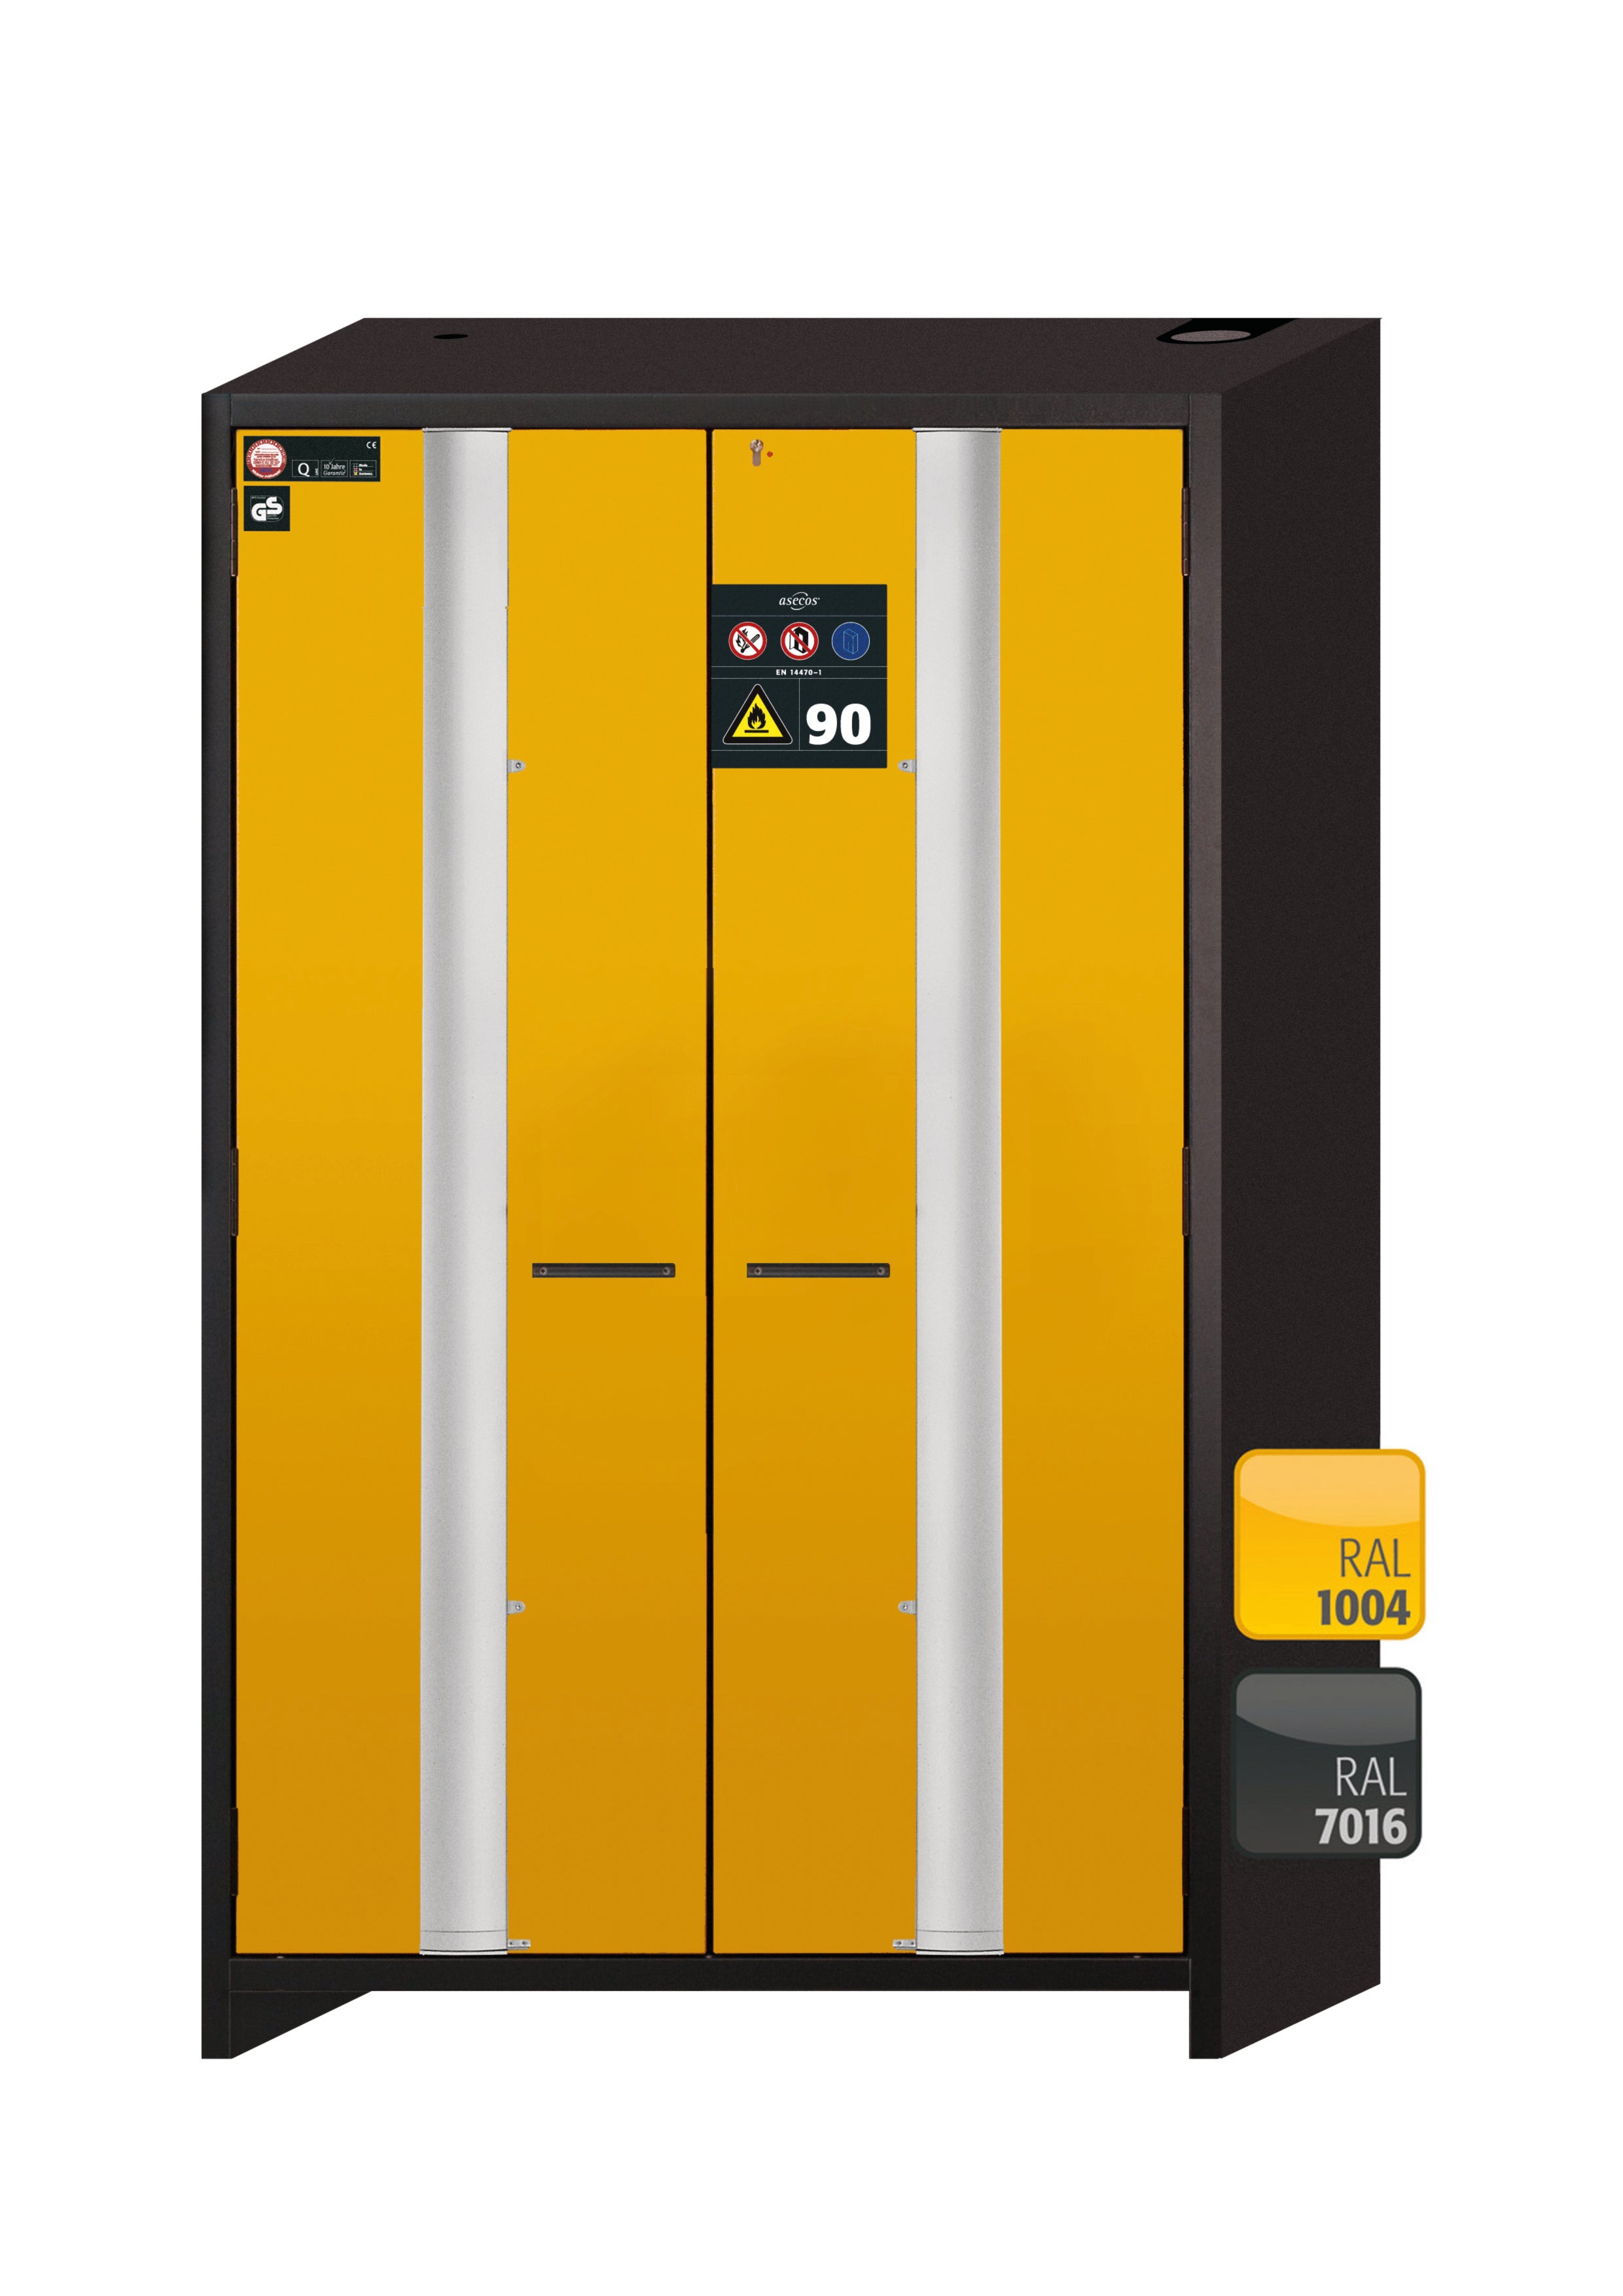 Type 90 safety cabinet Q-PHOENIX-90 model Q90.195.120.FD in safety yellow RAL 1004 with 2x standard shelves (stainless steel 1.4301)